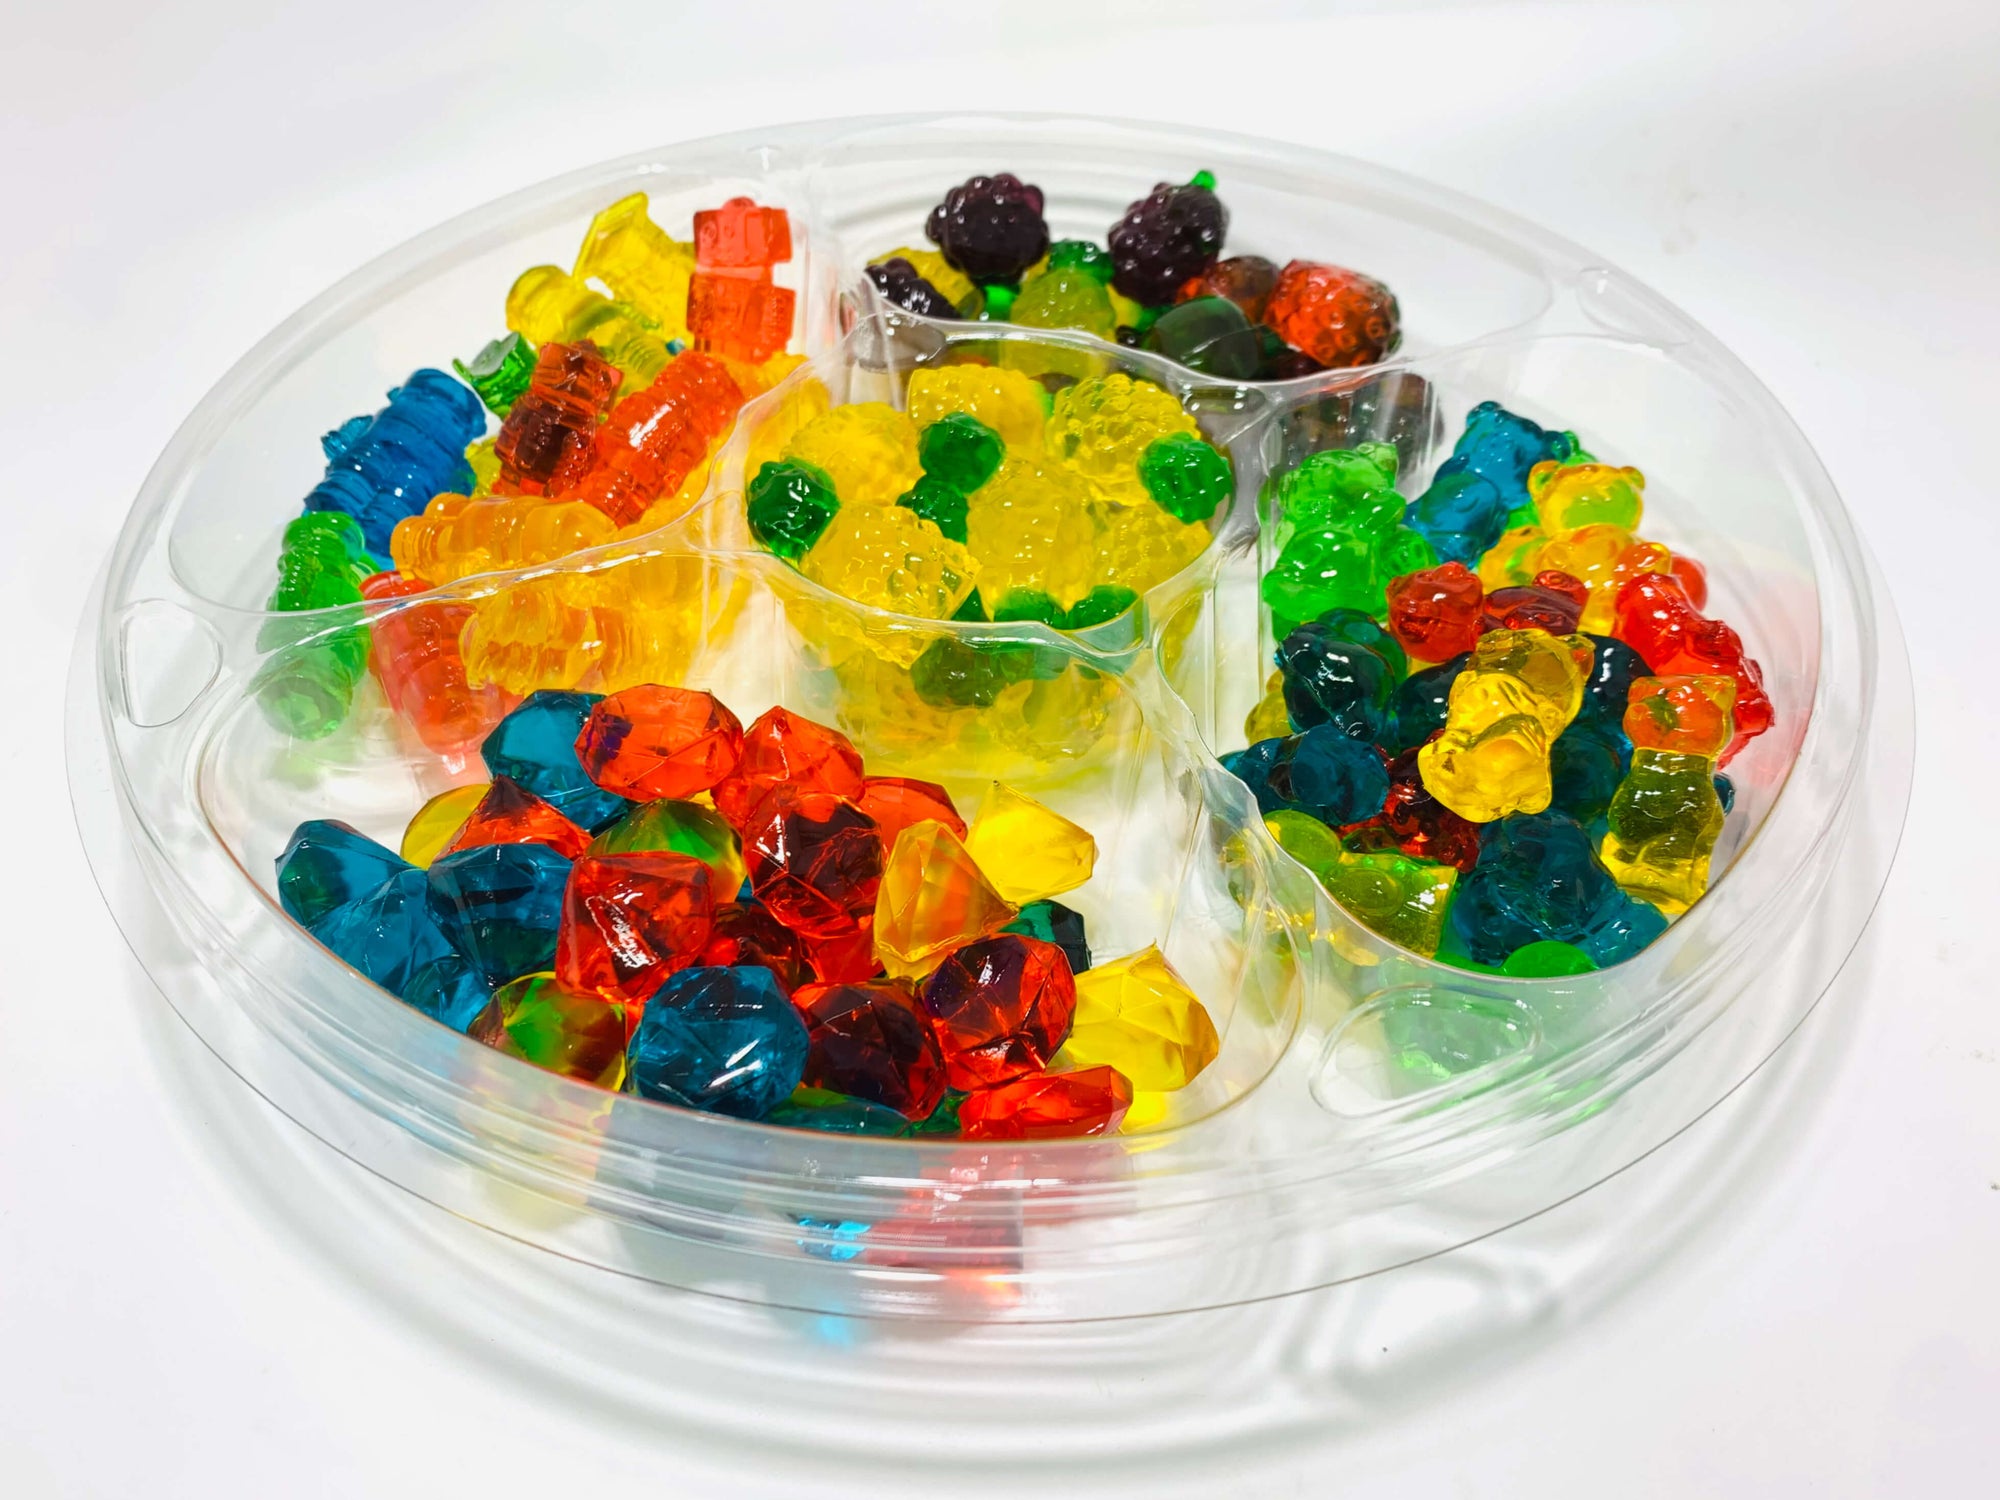 Mouth-Watering 3d gummy In Exciting Flavors 